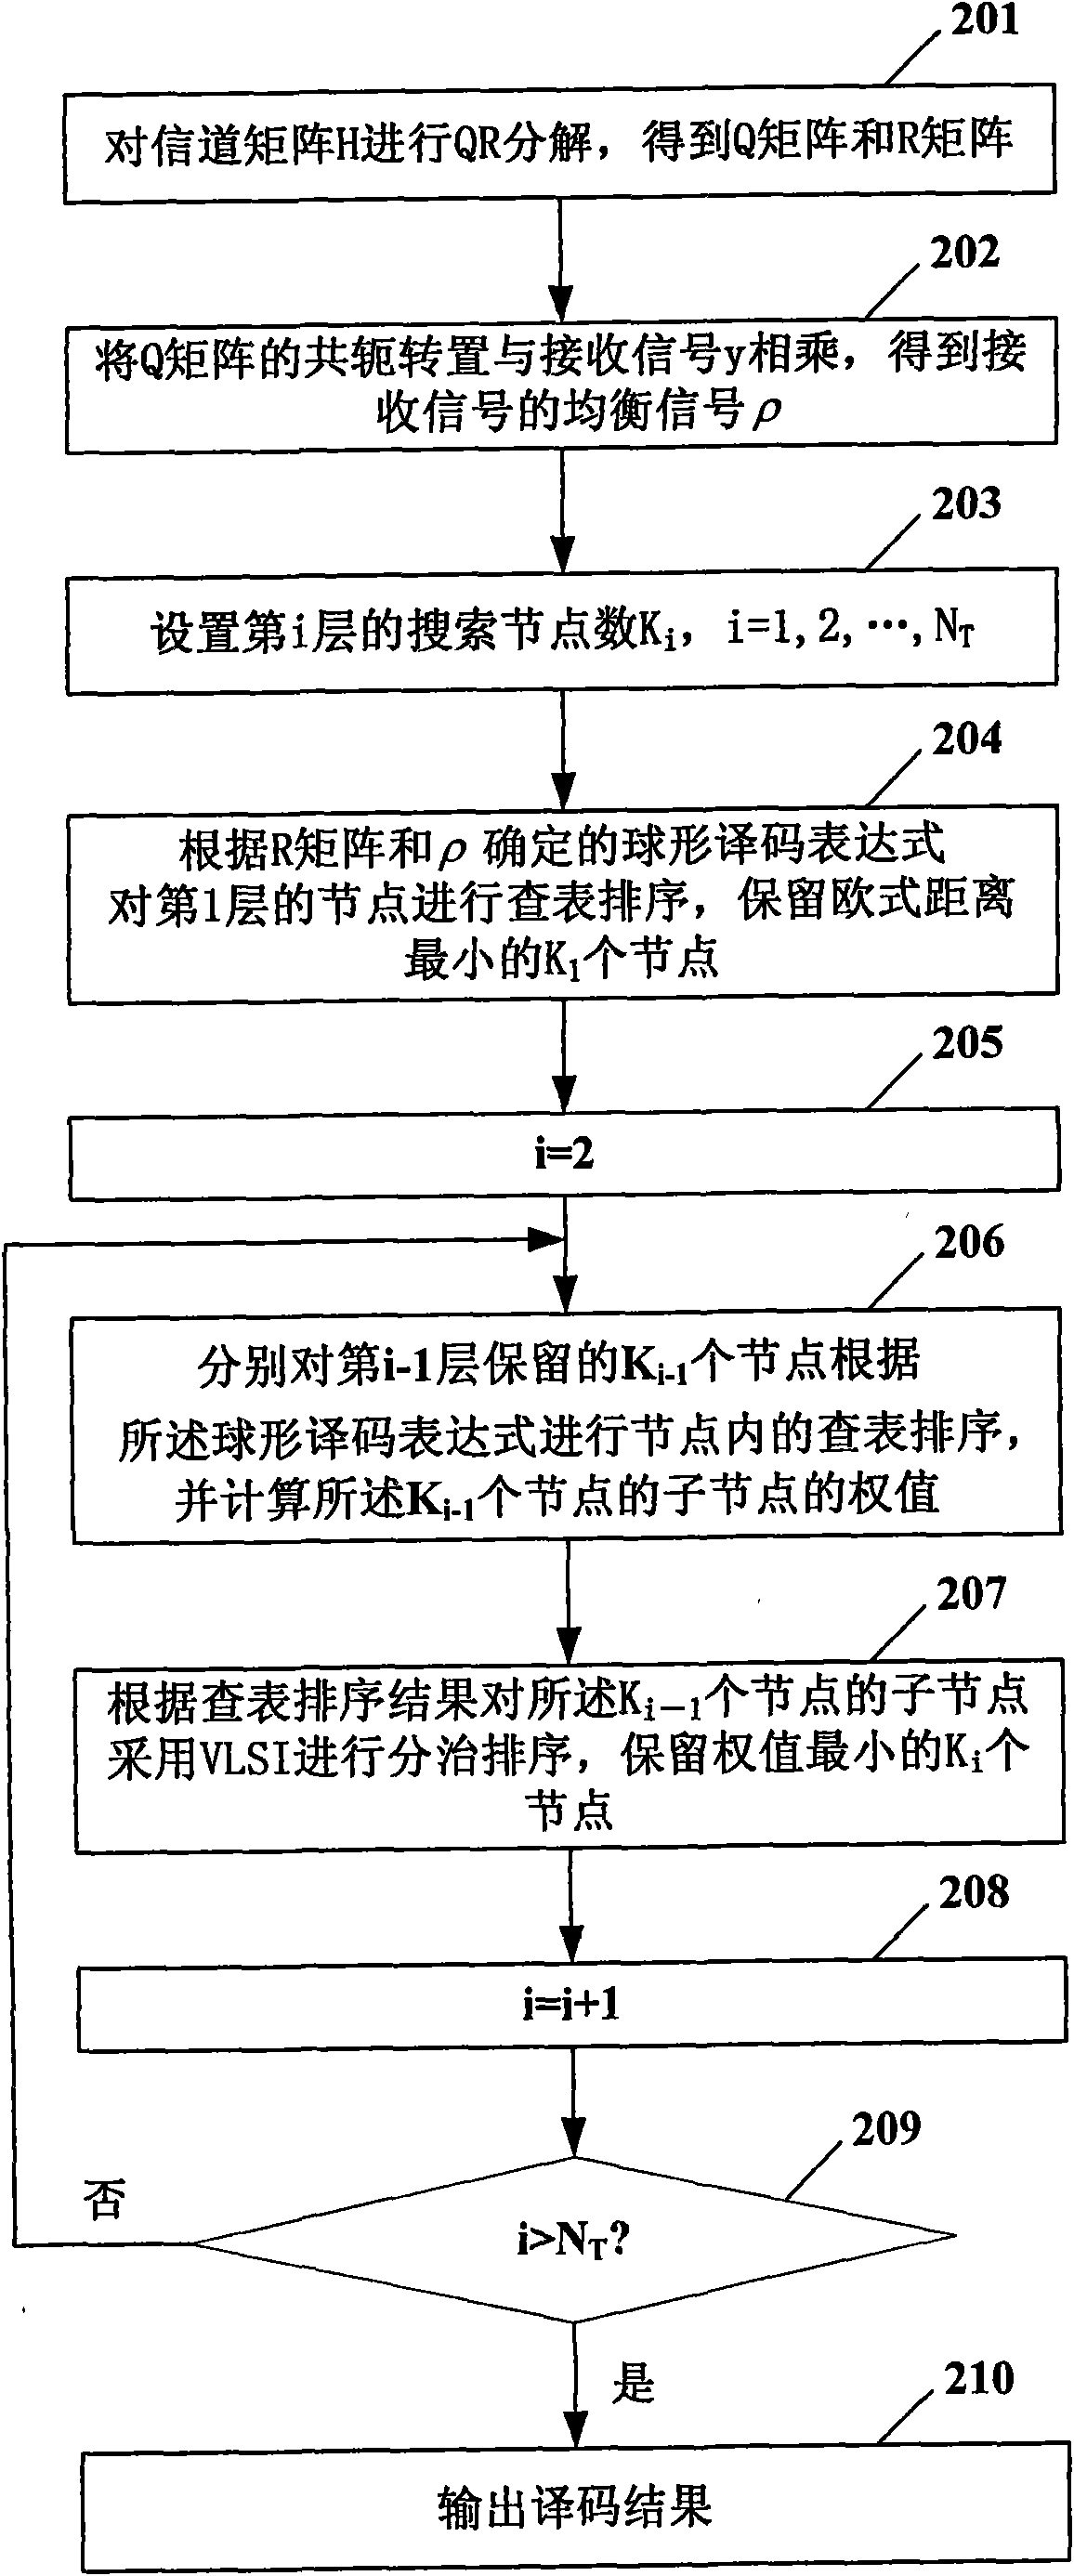 Sphere decoding detection method based on ultra large scale integrated circuit